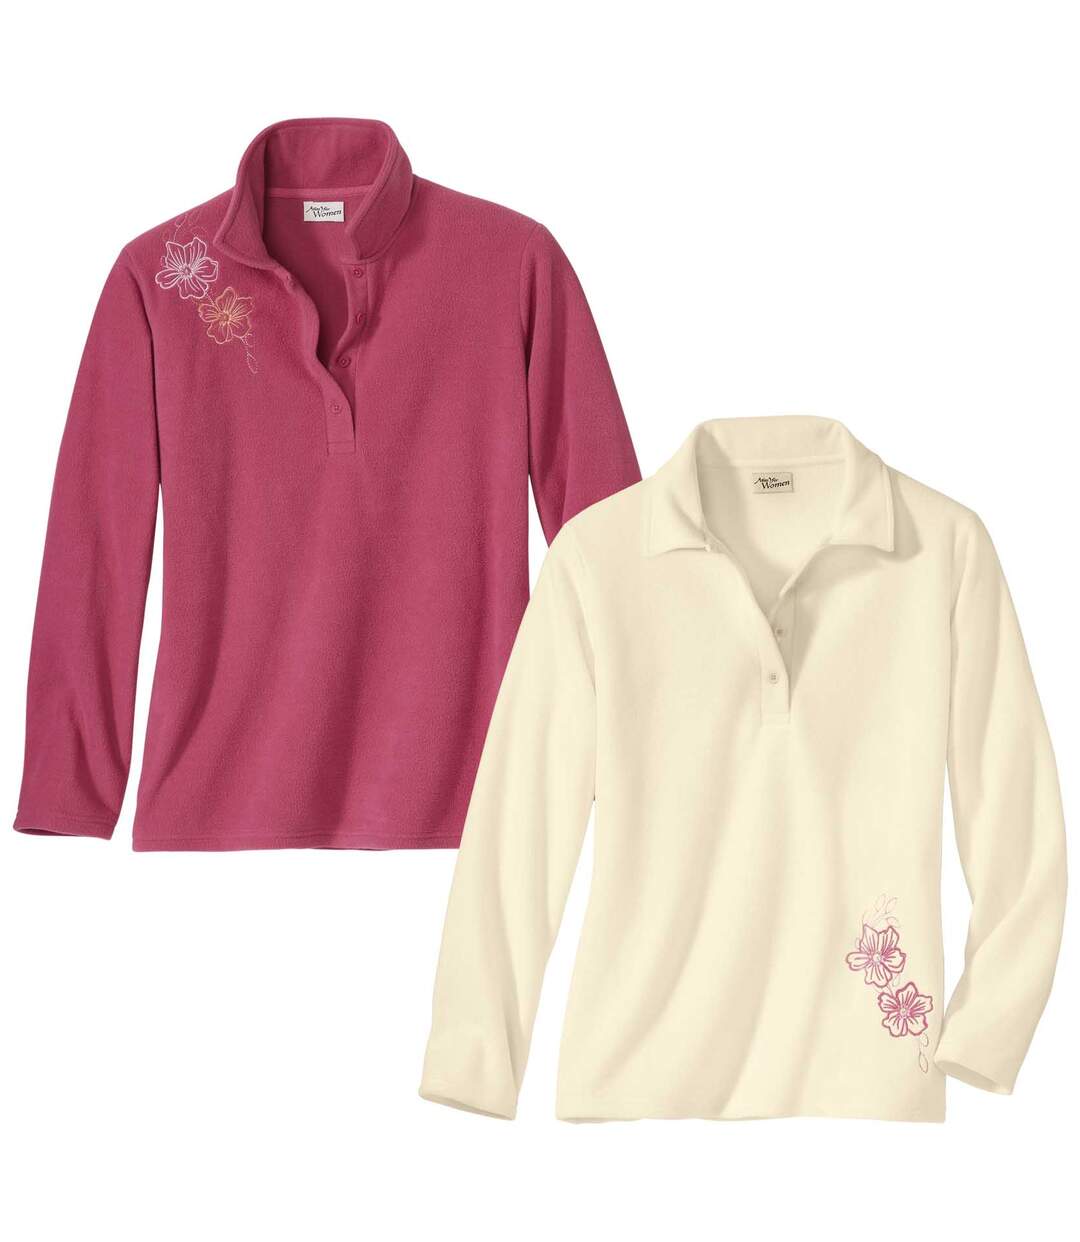 Pack of 2 Women's Embroidered Microfleece Sweaters - Pink White Atlas For Men